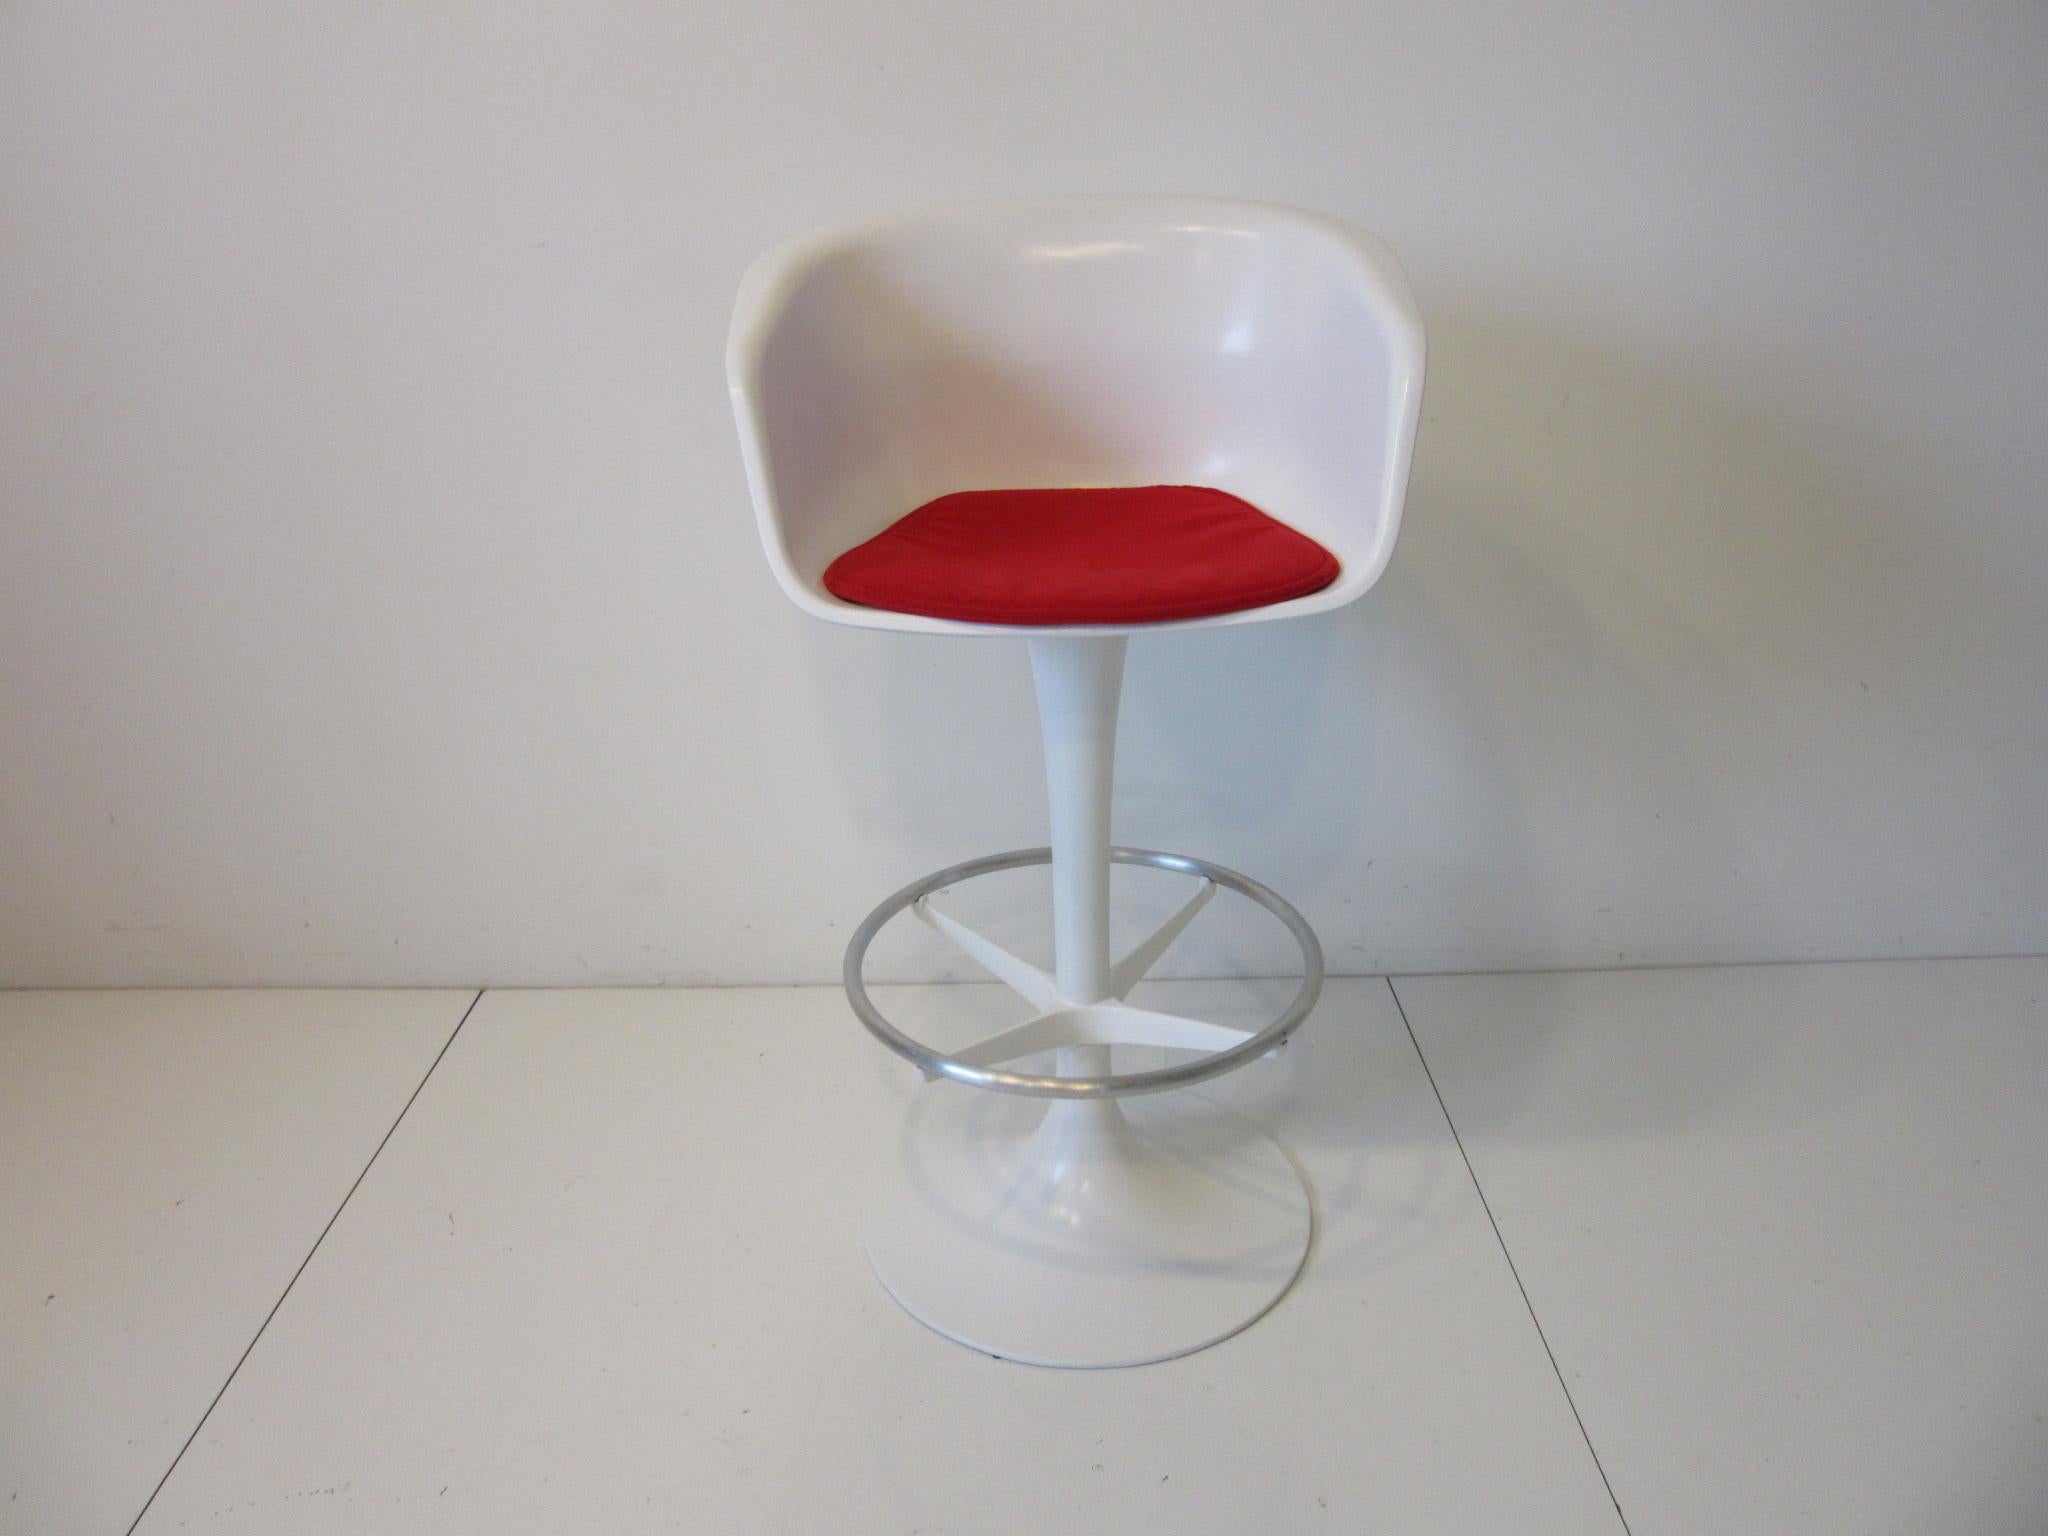 A set of four white swiveling fiberglass bar stools with metal tulip bases, brushed aluminum footrest rings and red fabric seat pads. Designed by Maurice Burke for the Burke Furniture company. The perfect look for that 1970's clean modern design